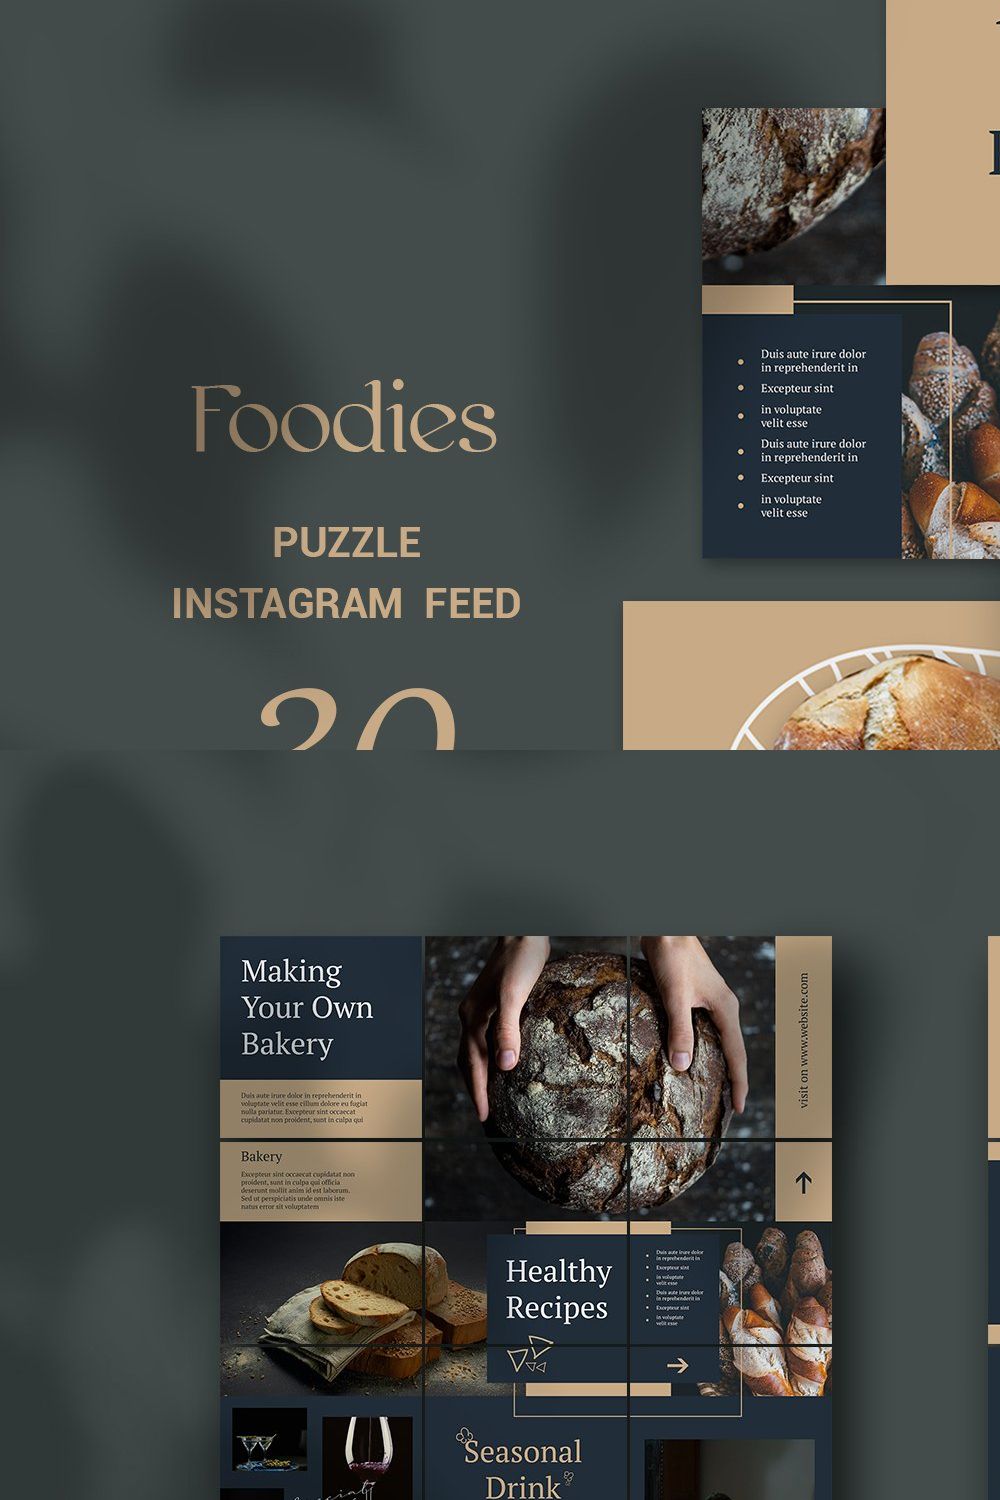 Foodies Puzzle Instagram Feed pinterest preview image.